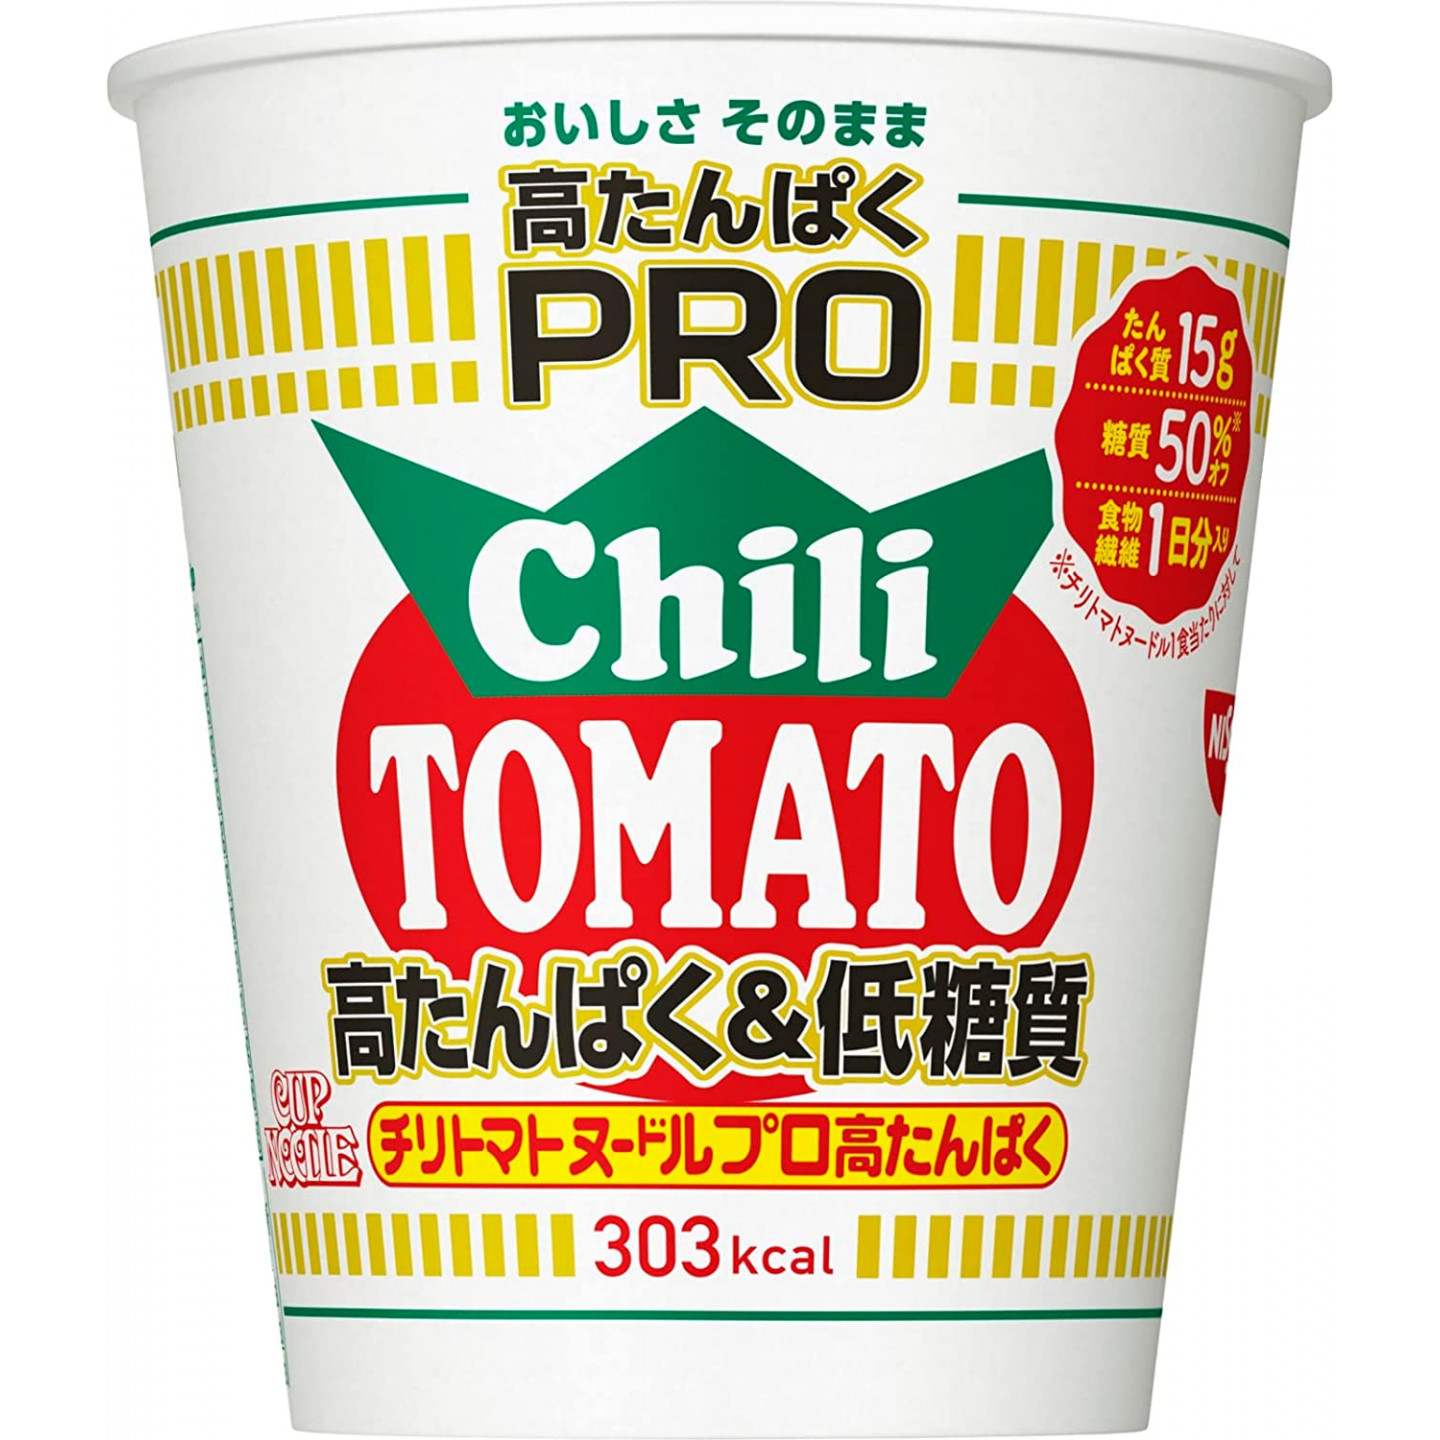 https://cookingsan.com/7648-product_hd/nissin-foods-cup-noodles-pro-chili-tomato.jpg